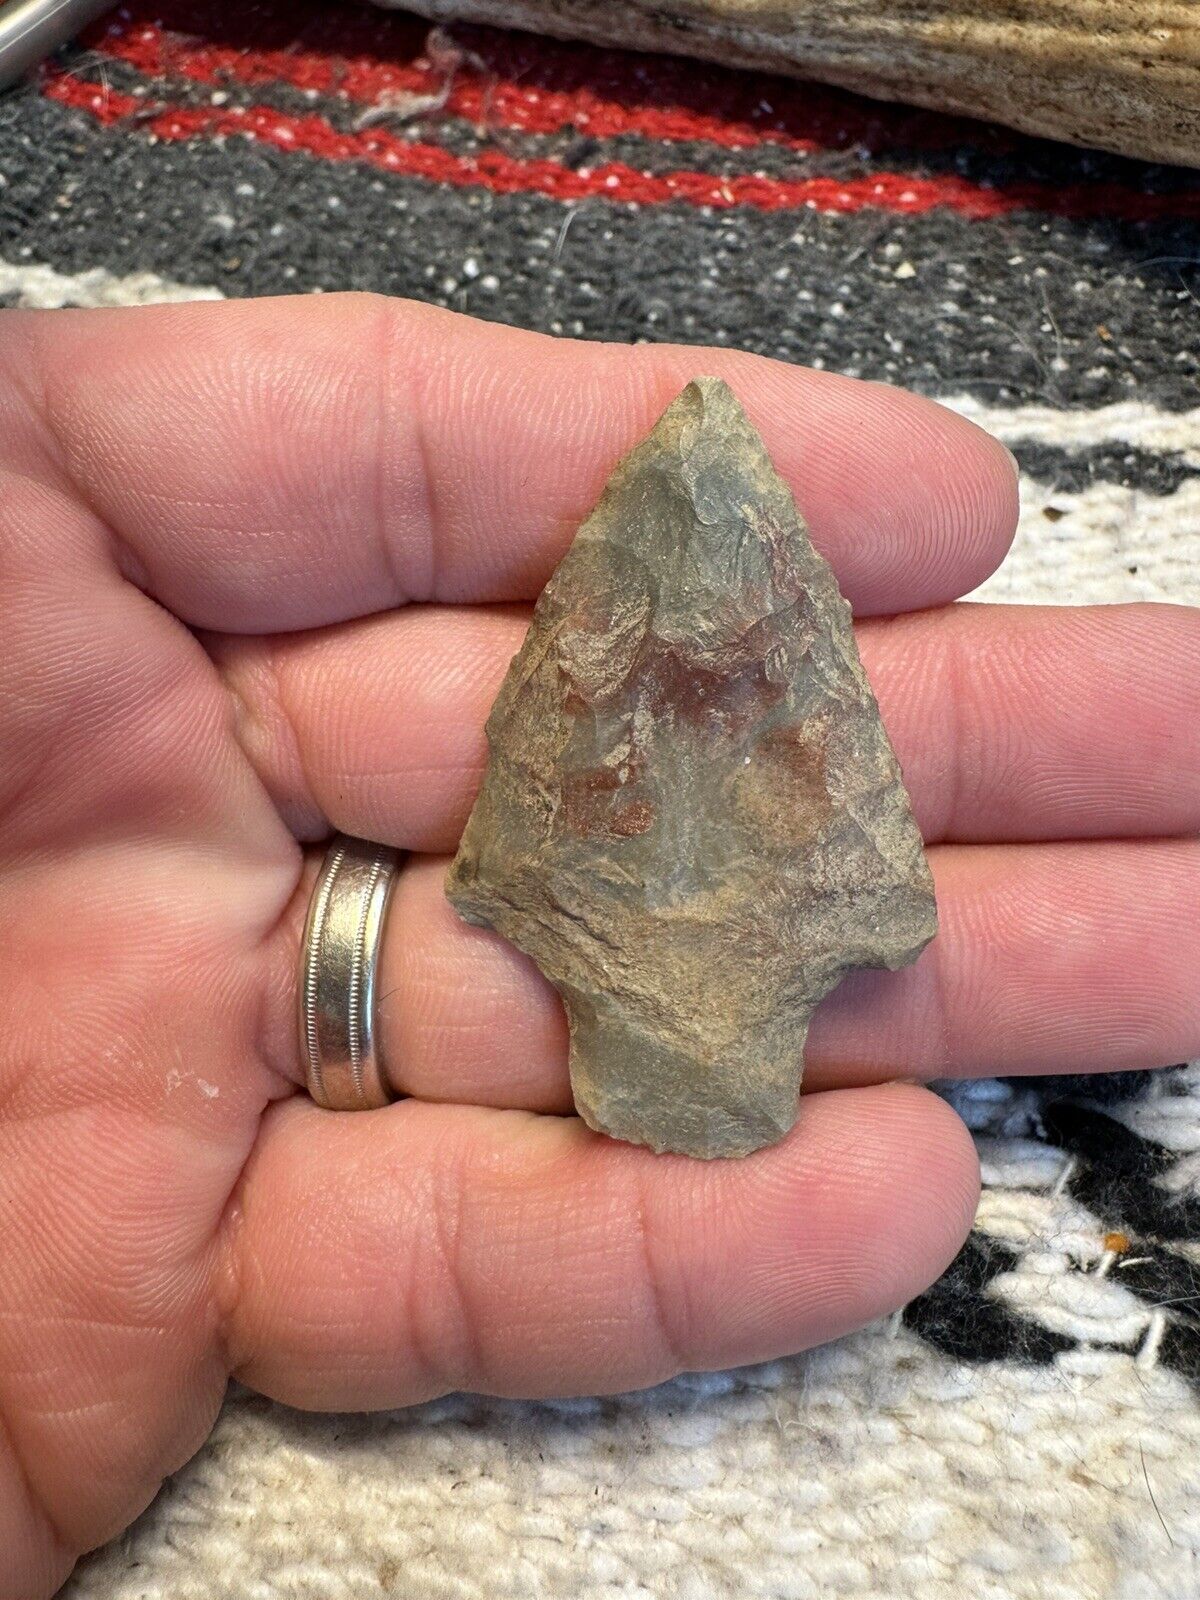 Colorful Stemmed Arrowhead Archaic Period Wise County Virginia. M24